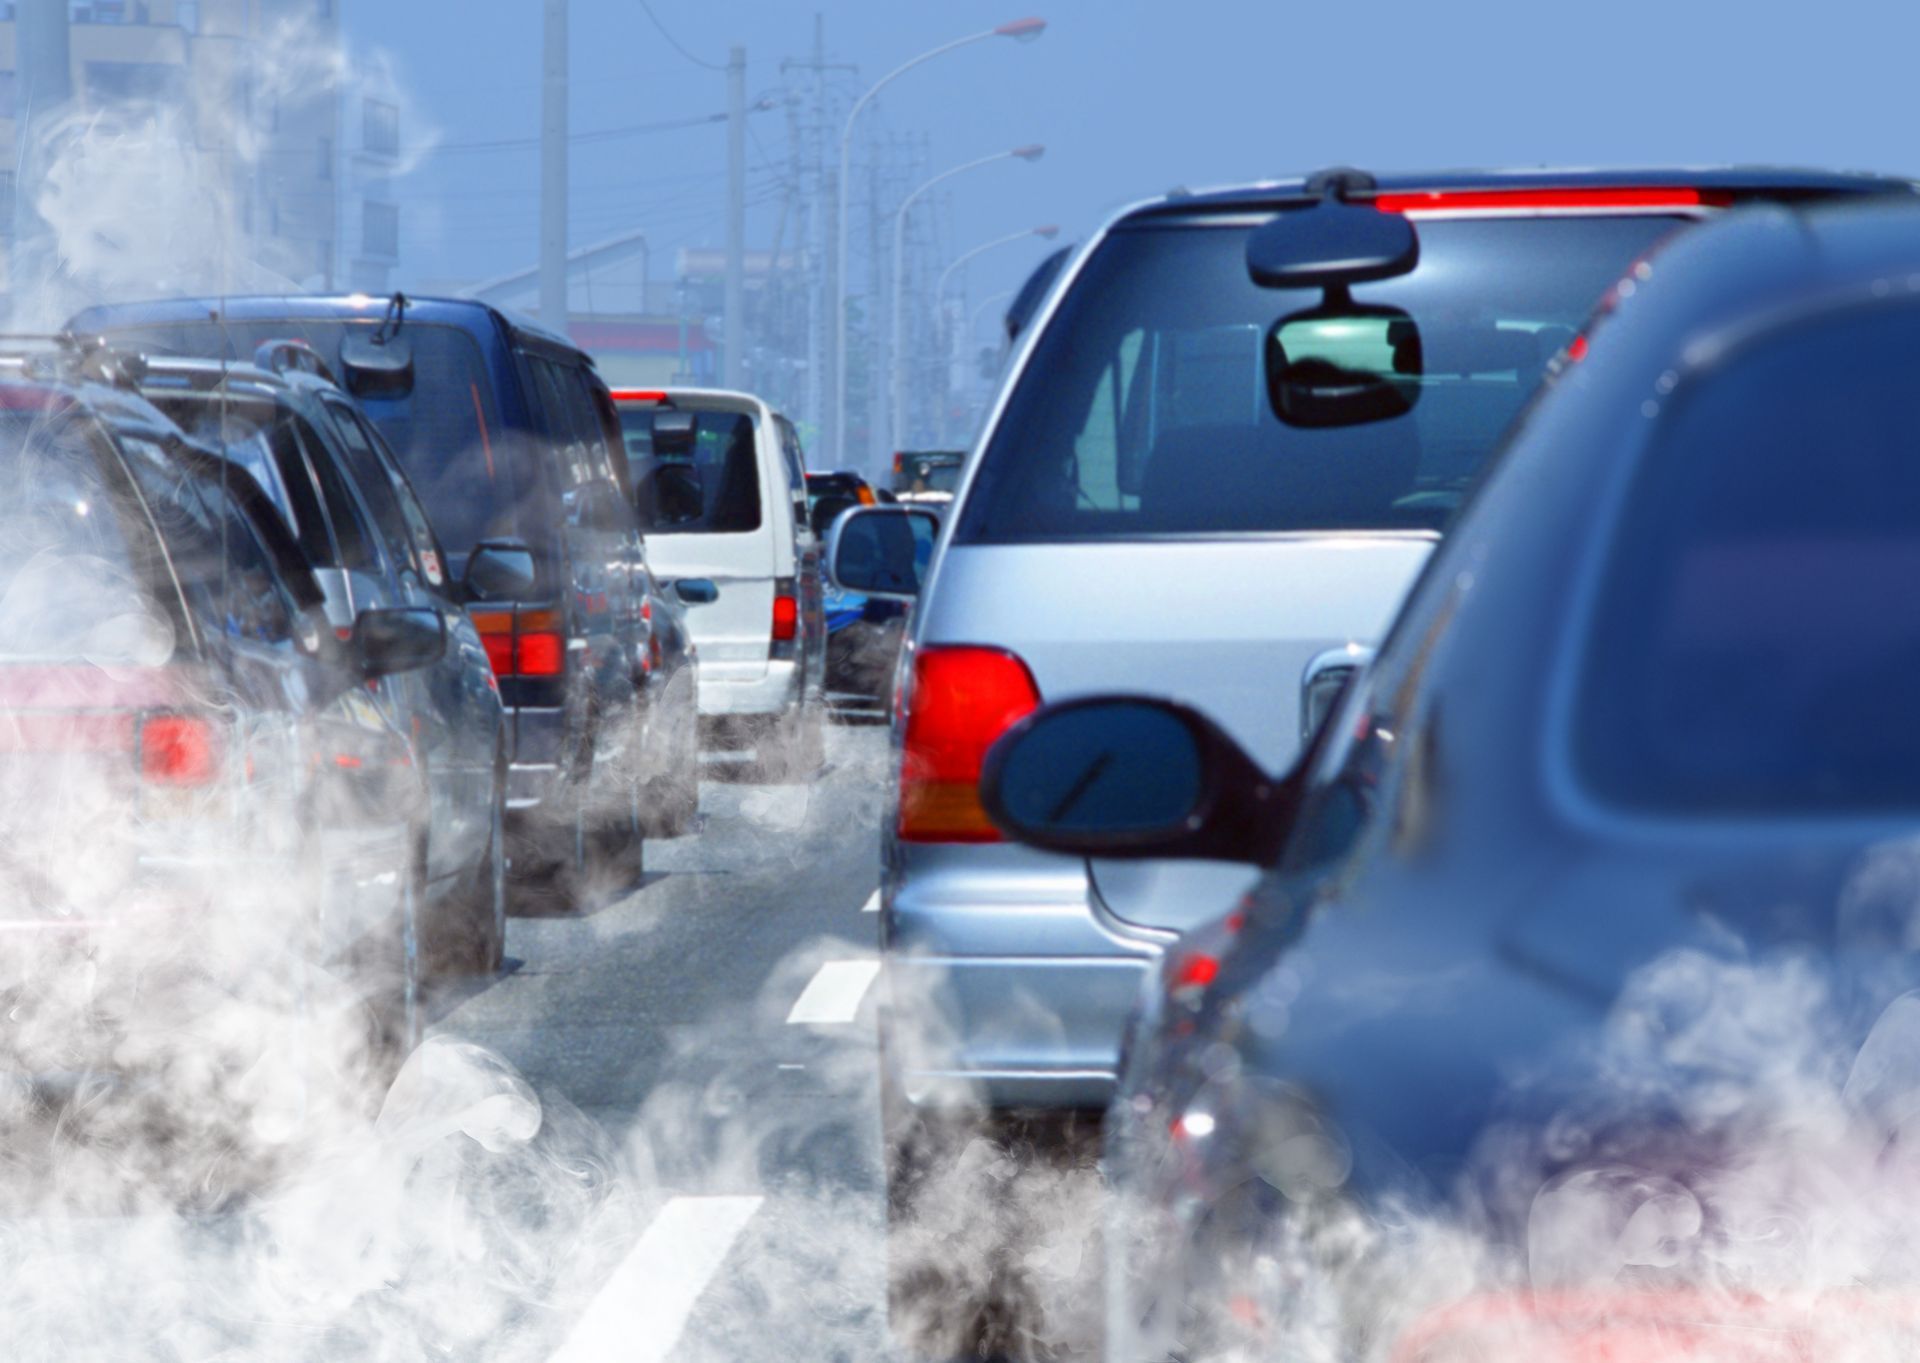 Air pollution harms the health of New Jersey commuters